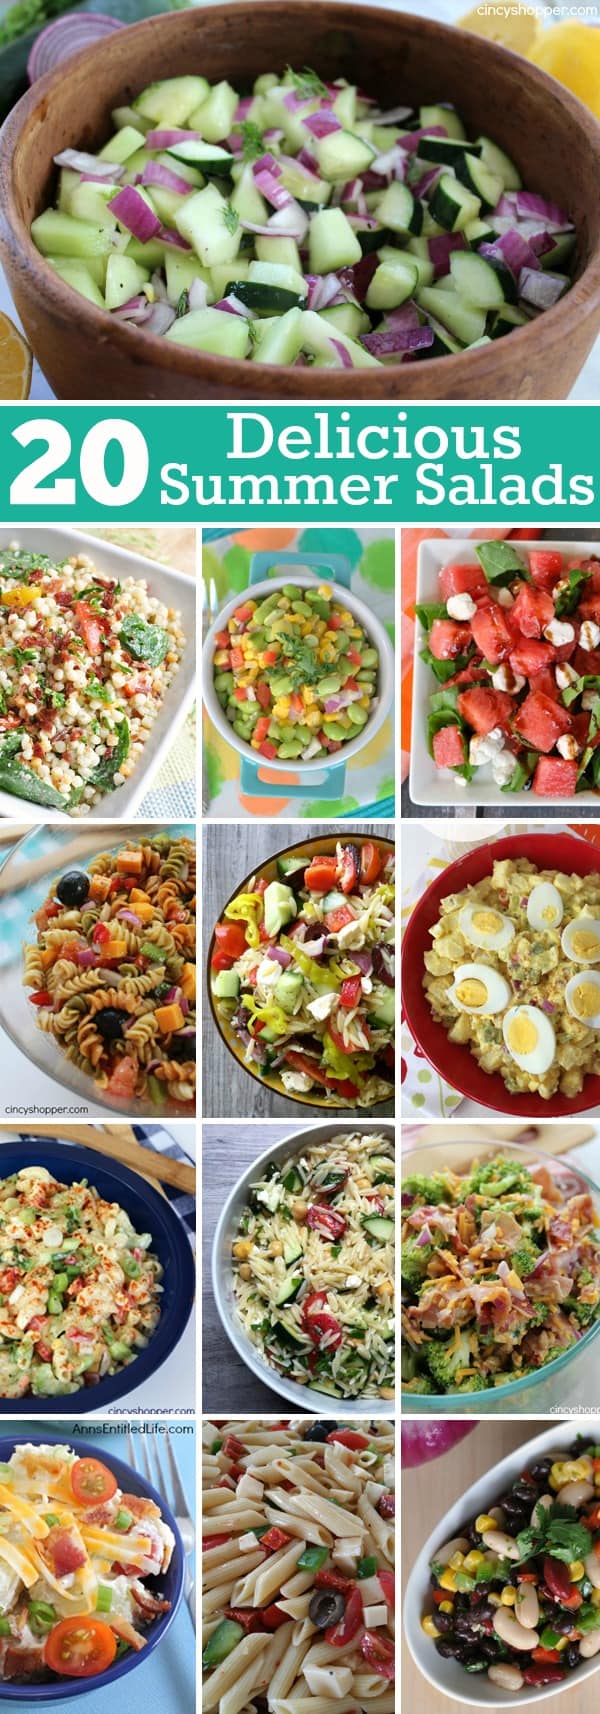 20 Delicious Summer Salads for your picnics, bbqs and parties. Pasta, Macaroni, Potato and more!